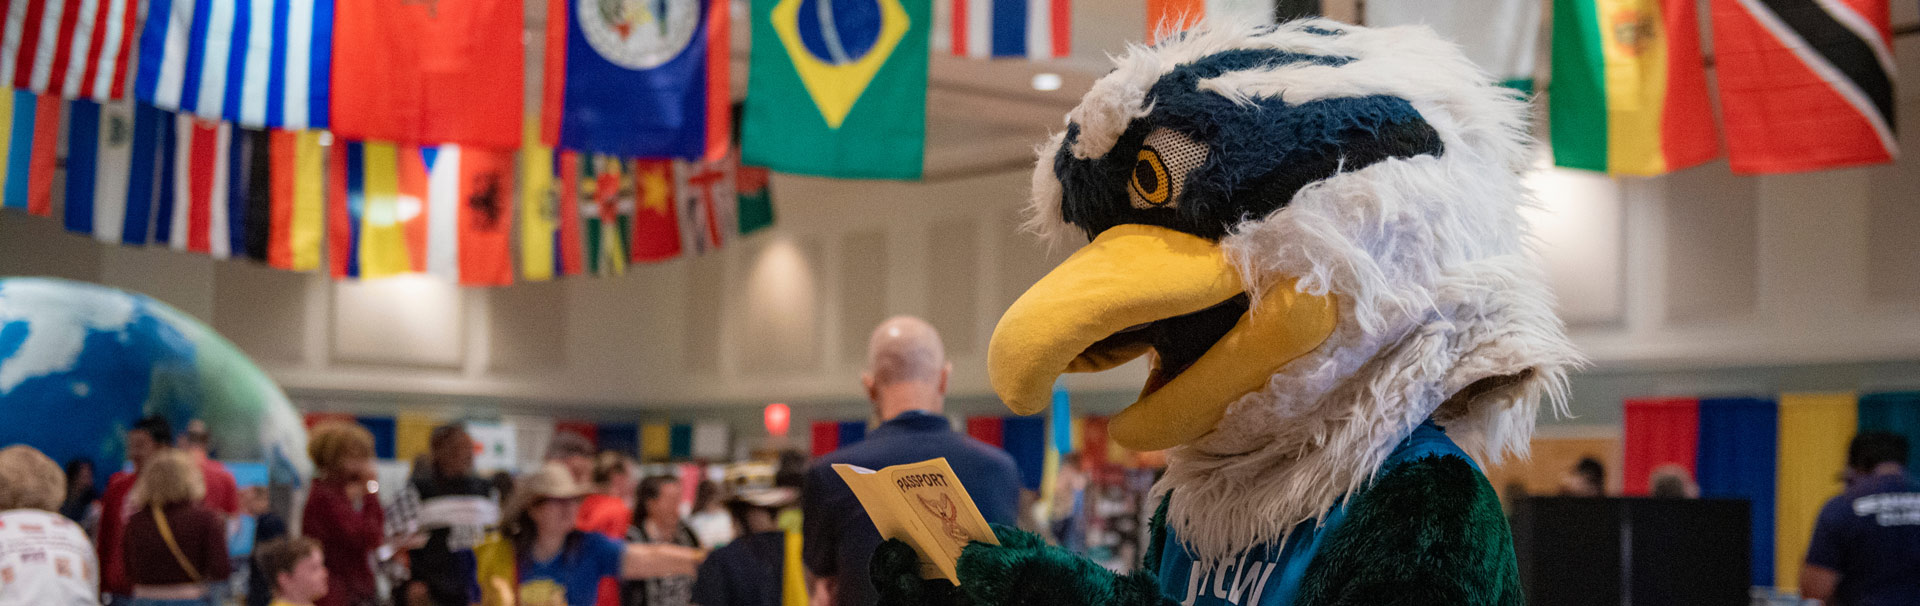 sammy seahawk holding a passport in front of flags